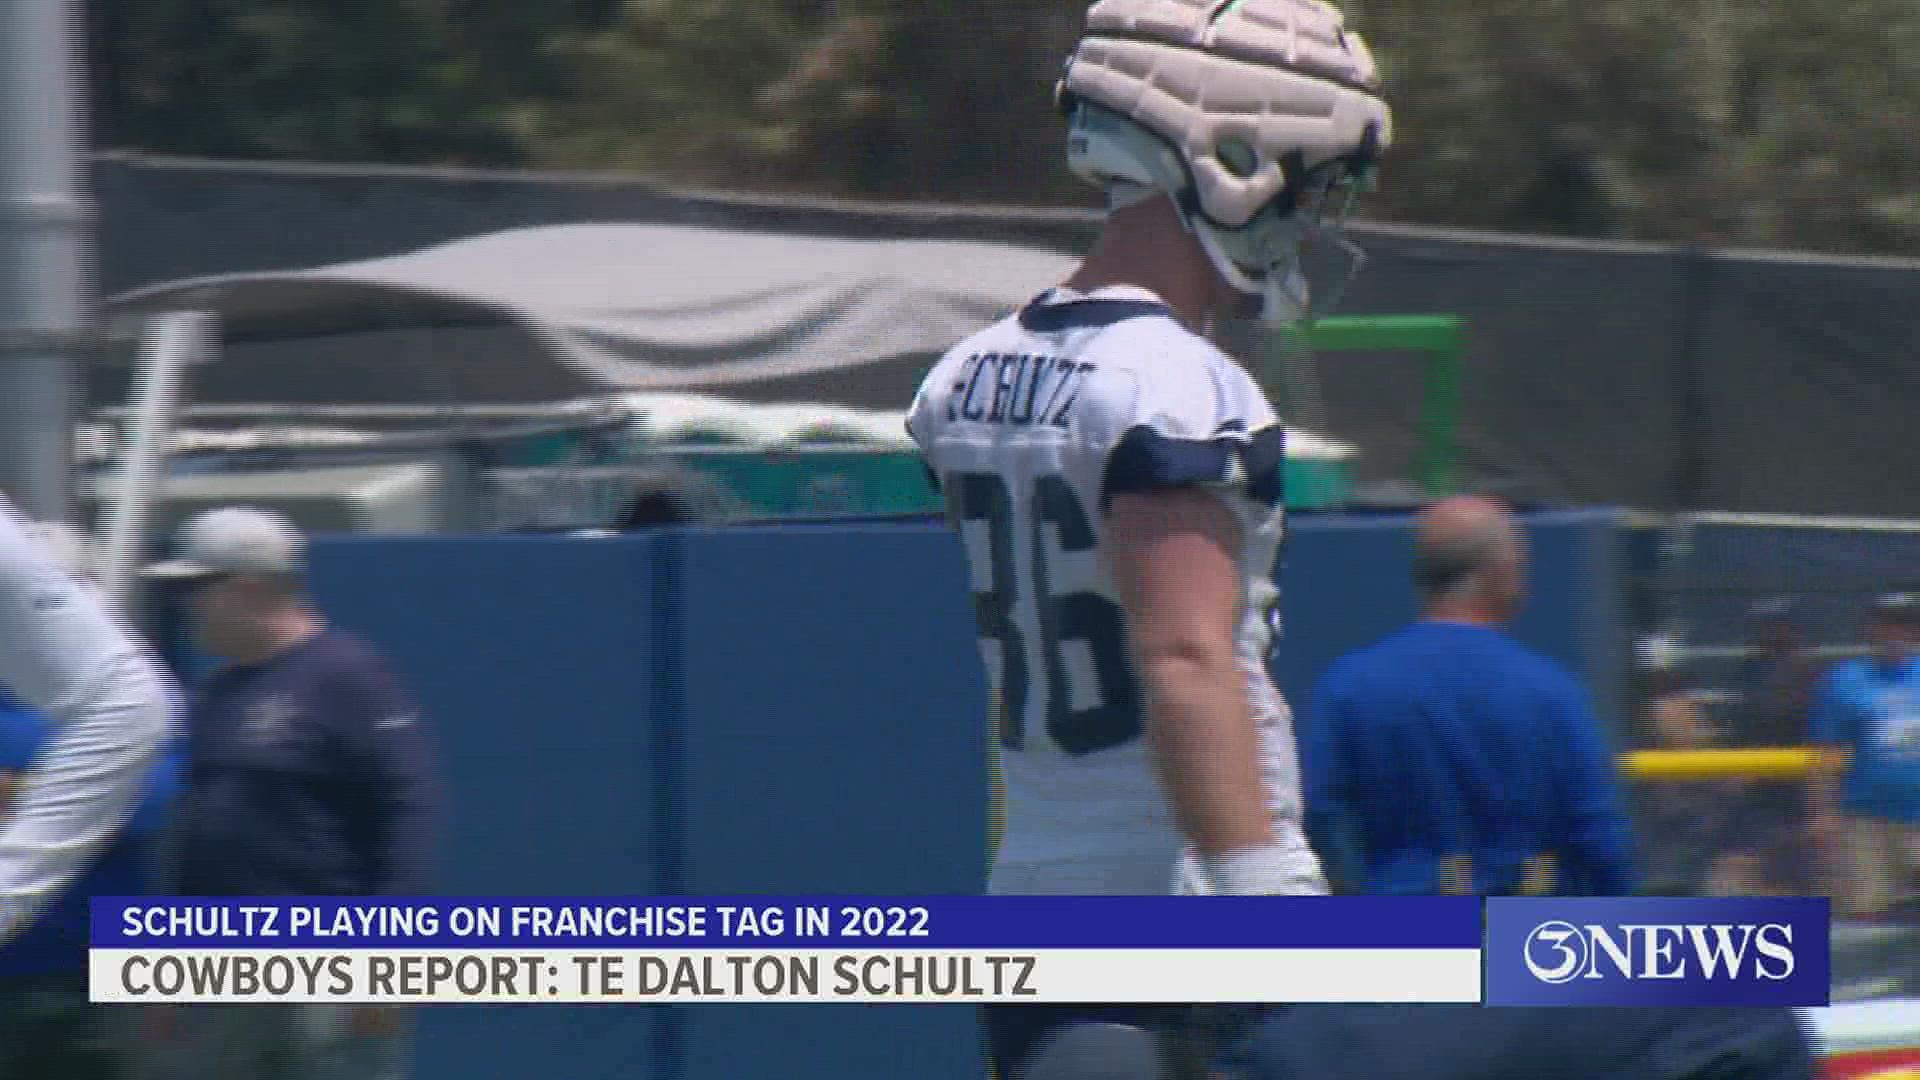 Schultz is one of the proven weapons for Dak Prescott heading into the opening of the 2022 season.